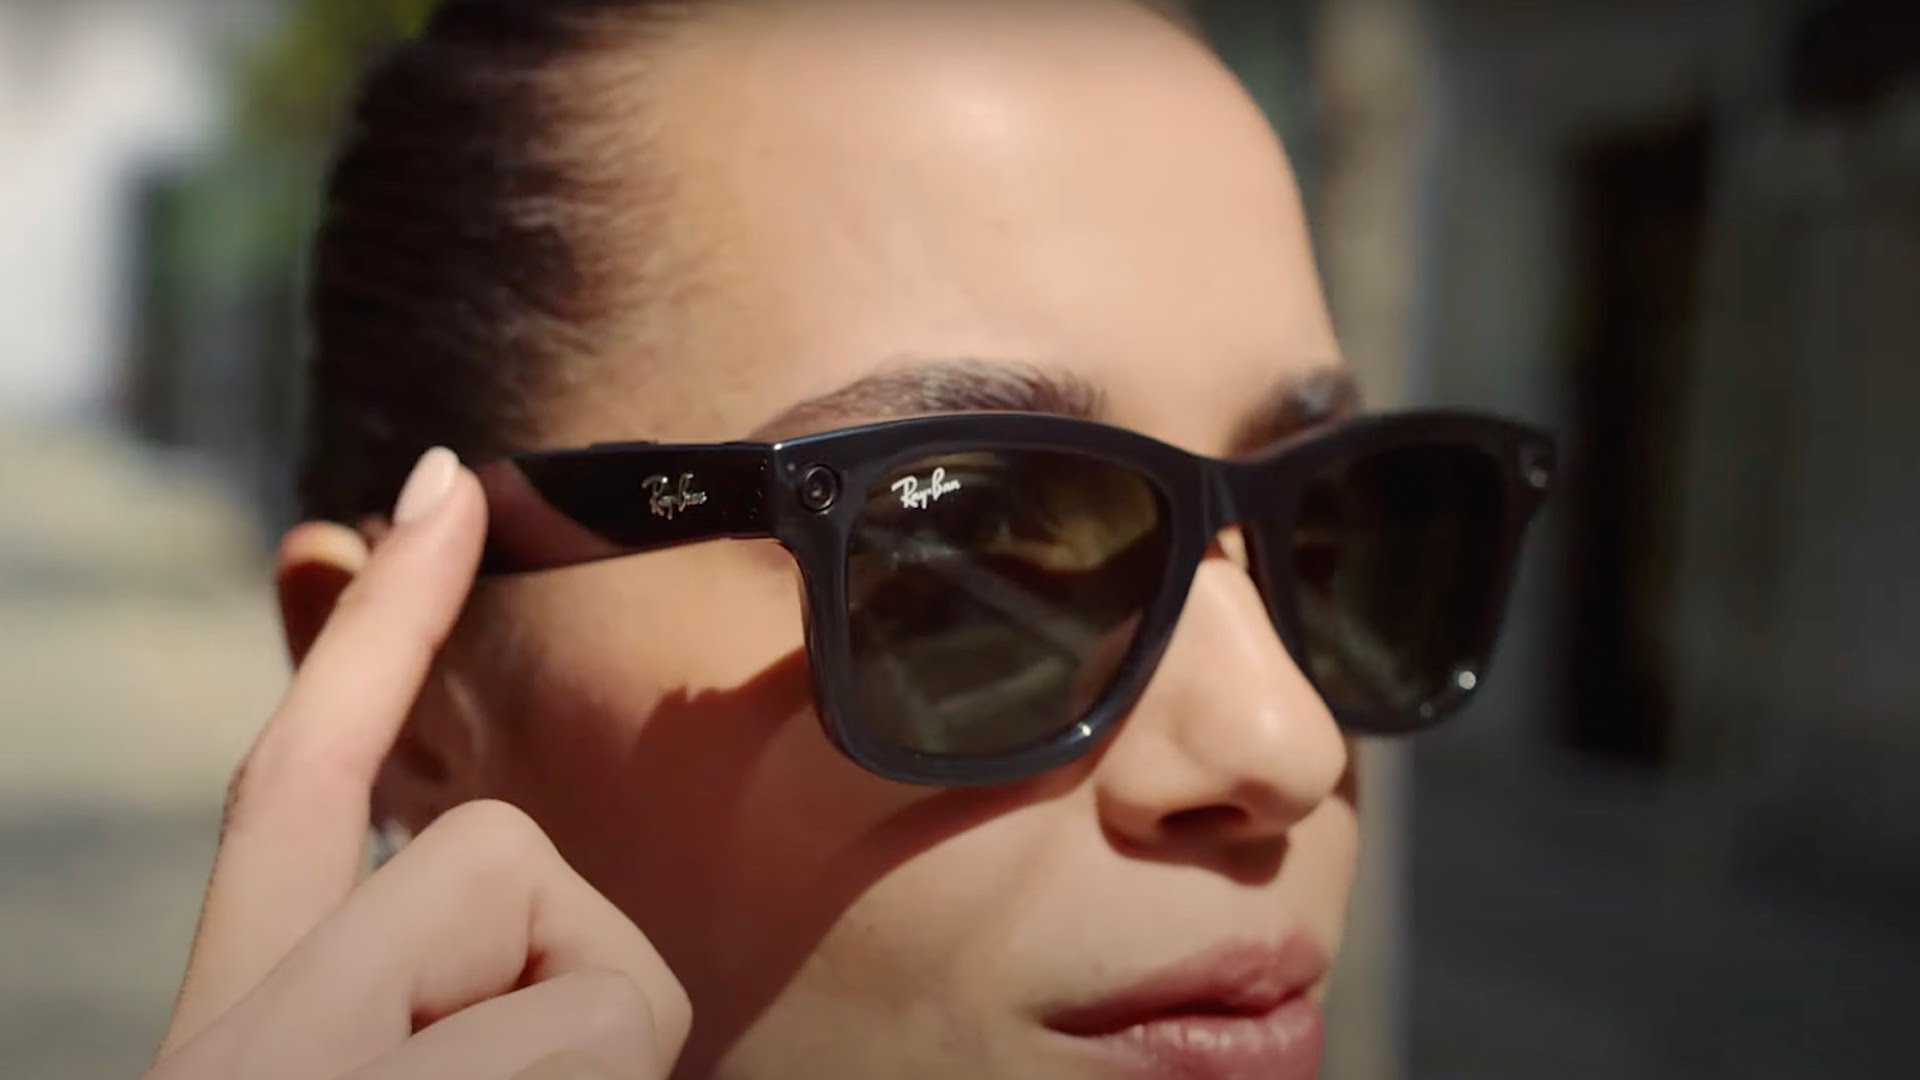 Packed with technology: How Meta's Ray-Ban smart glasses were created